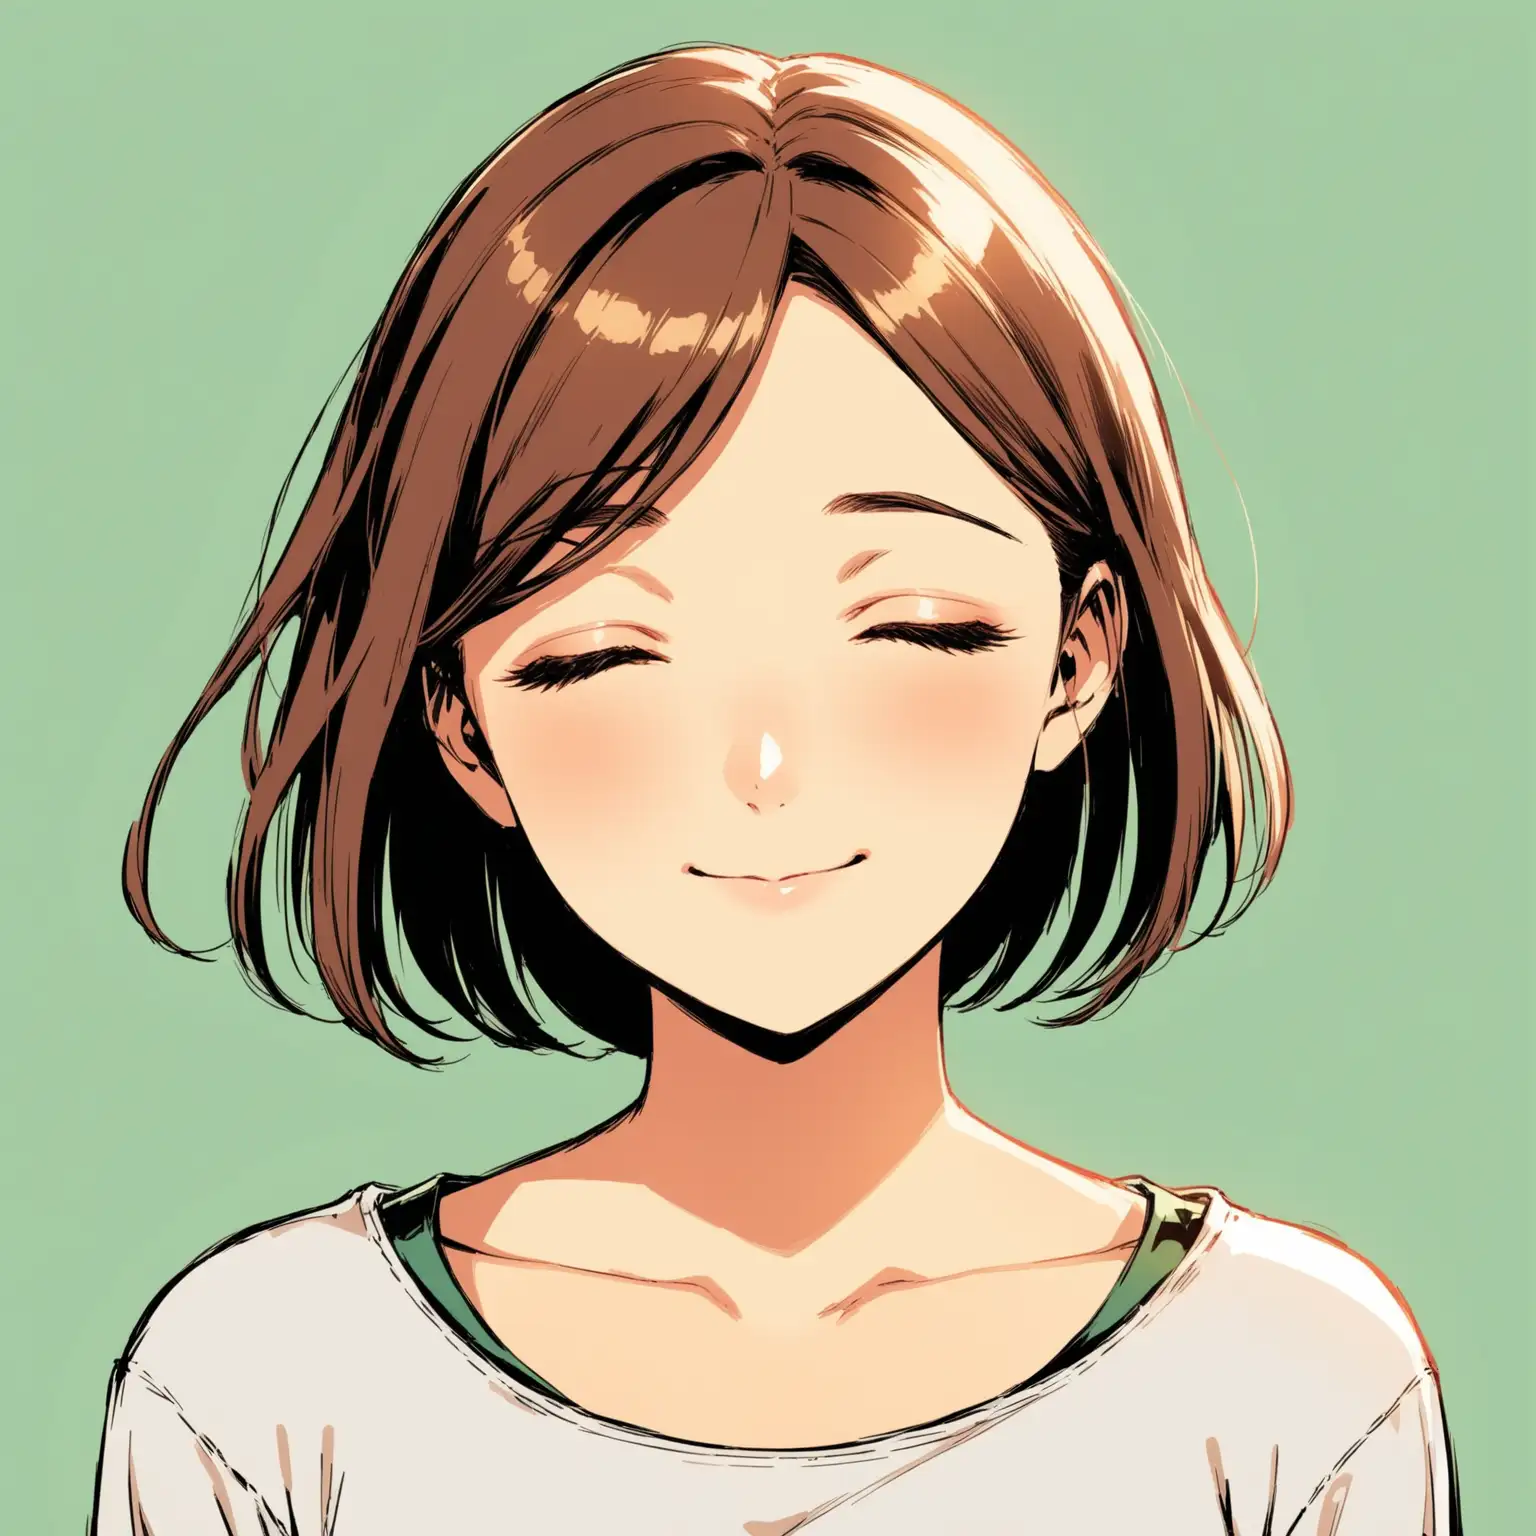 Comic book style:  From the top of her head to just below her bust we see  a beautiful girl in her twenties with a closed mouth smile on her face and her eyes closed.   She's serene  Simple background.  